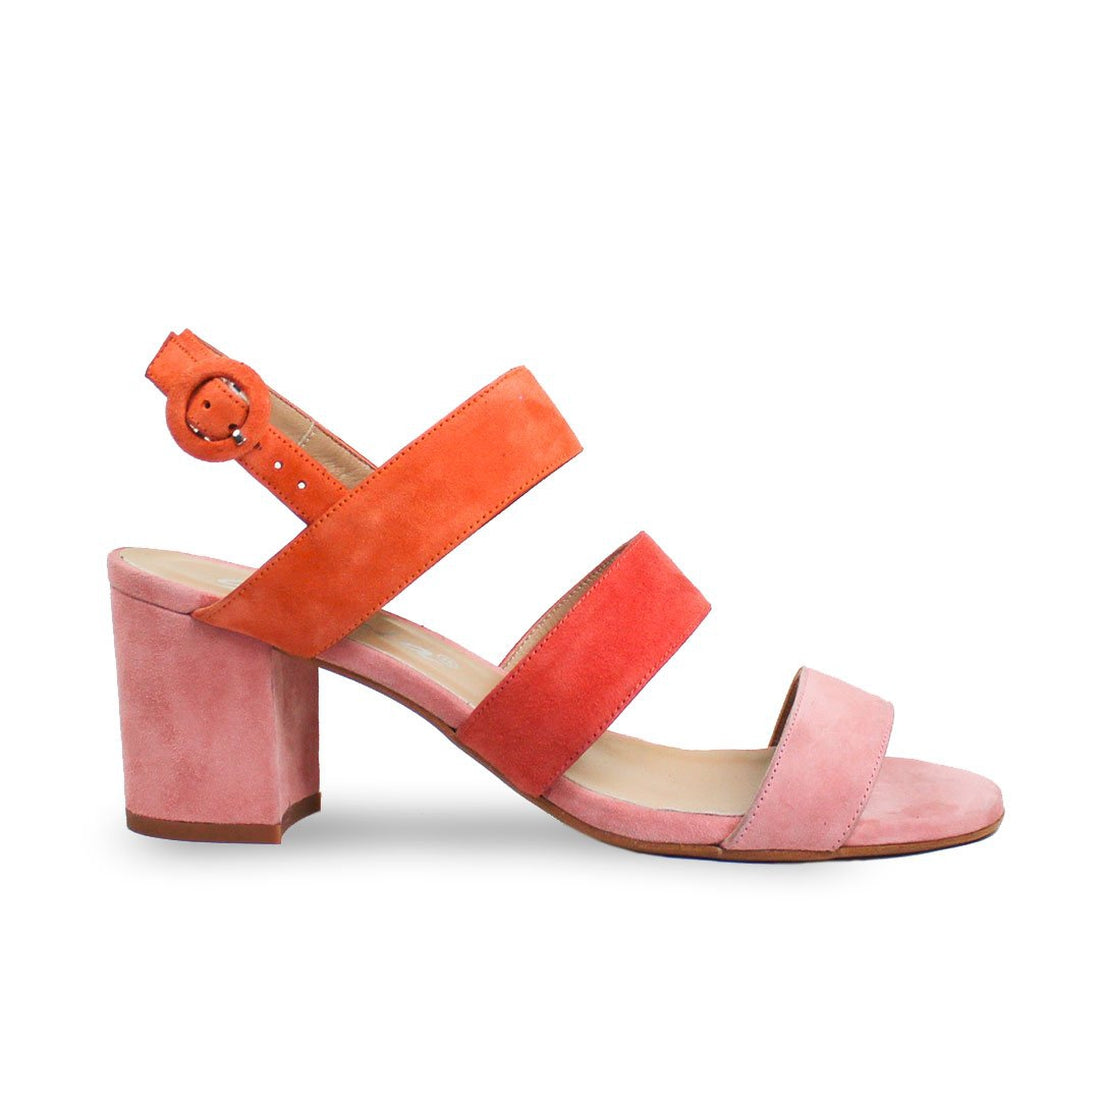 SHEYLA Salmon Pink, Coral and Orange Suede Leather